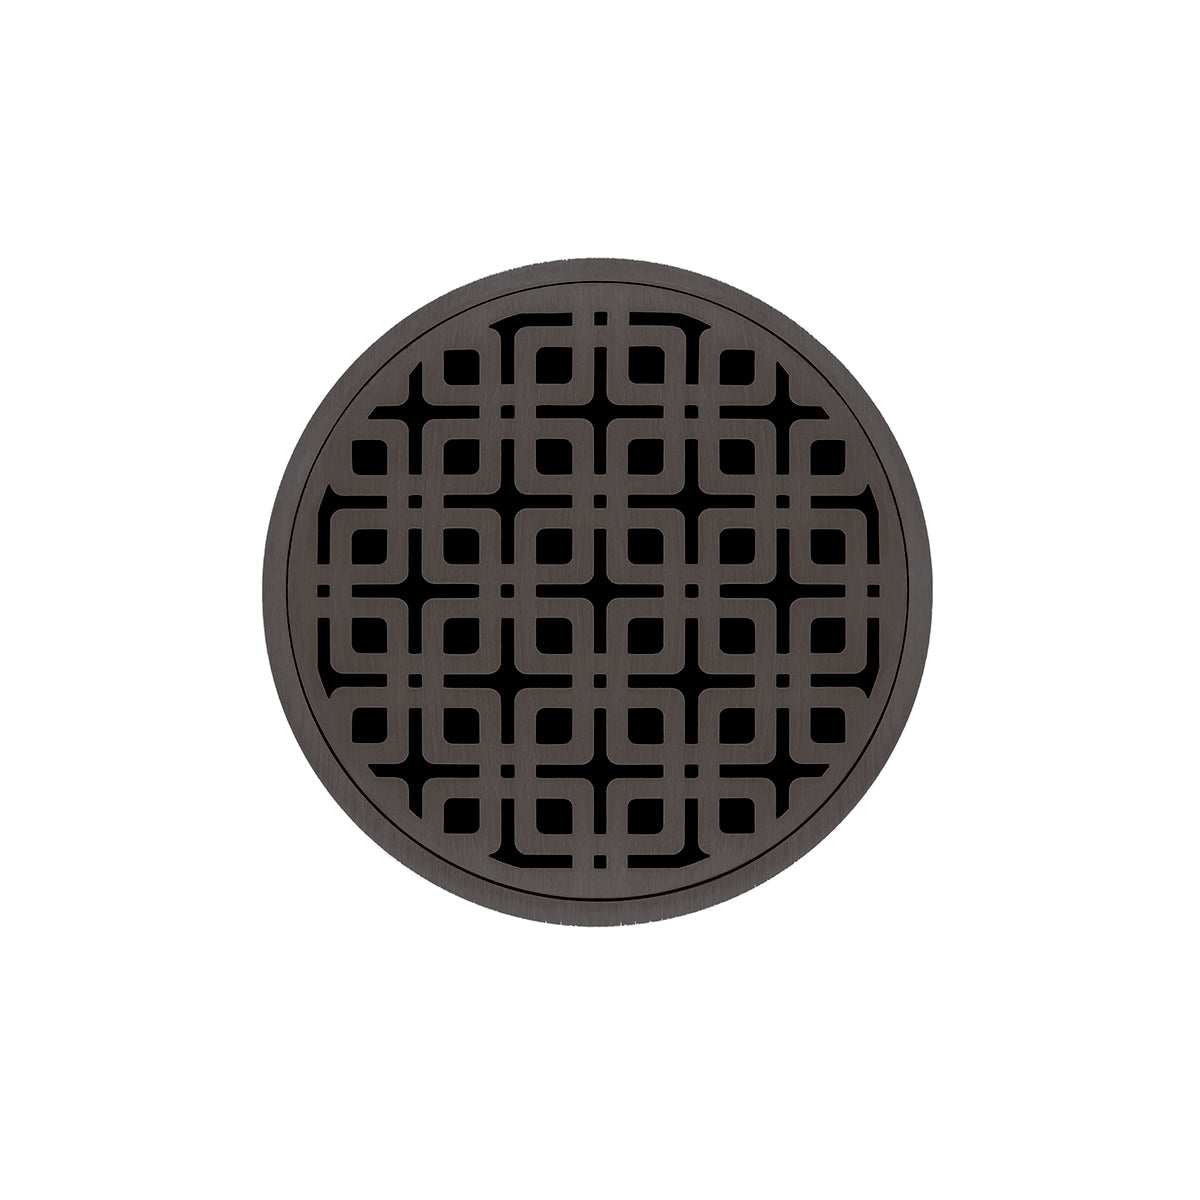 Infinity Drain 5" Round RKD 5 Premium Center Drain Kit with Link Pattern Decorative Plate with Cast Iron Drain Body, 2" Outlet